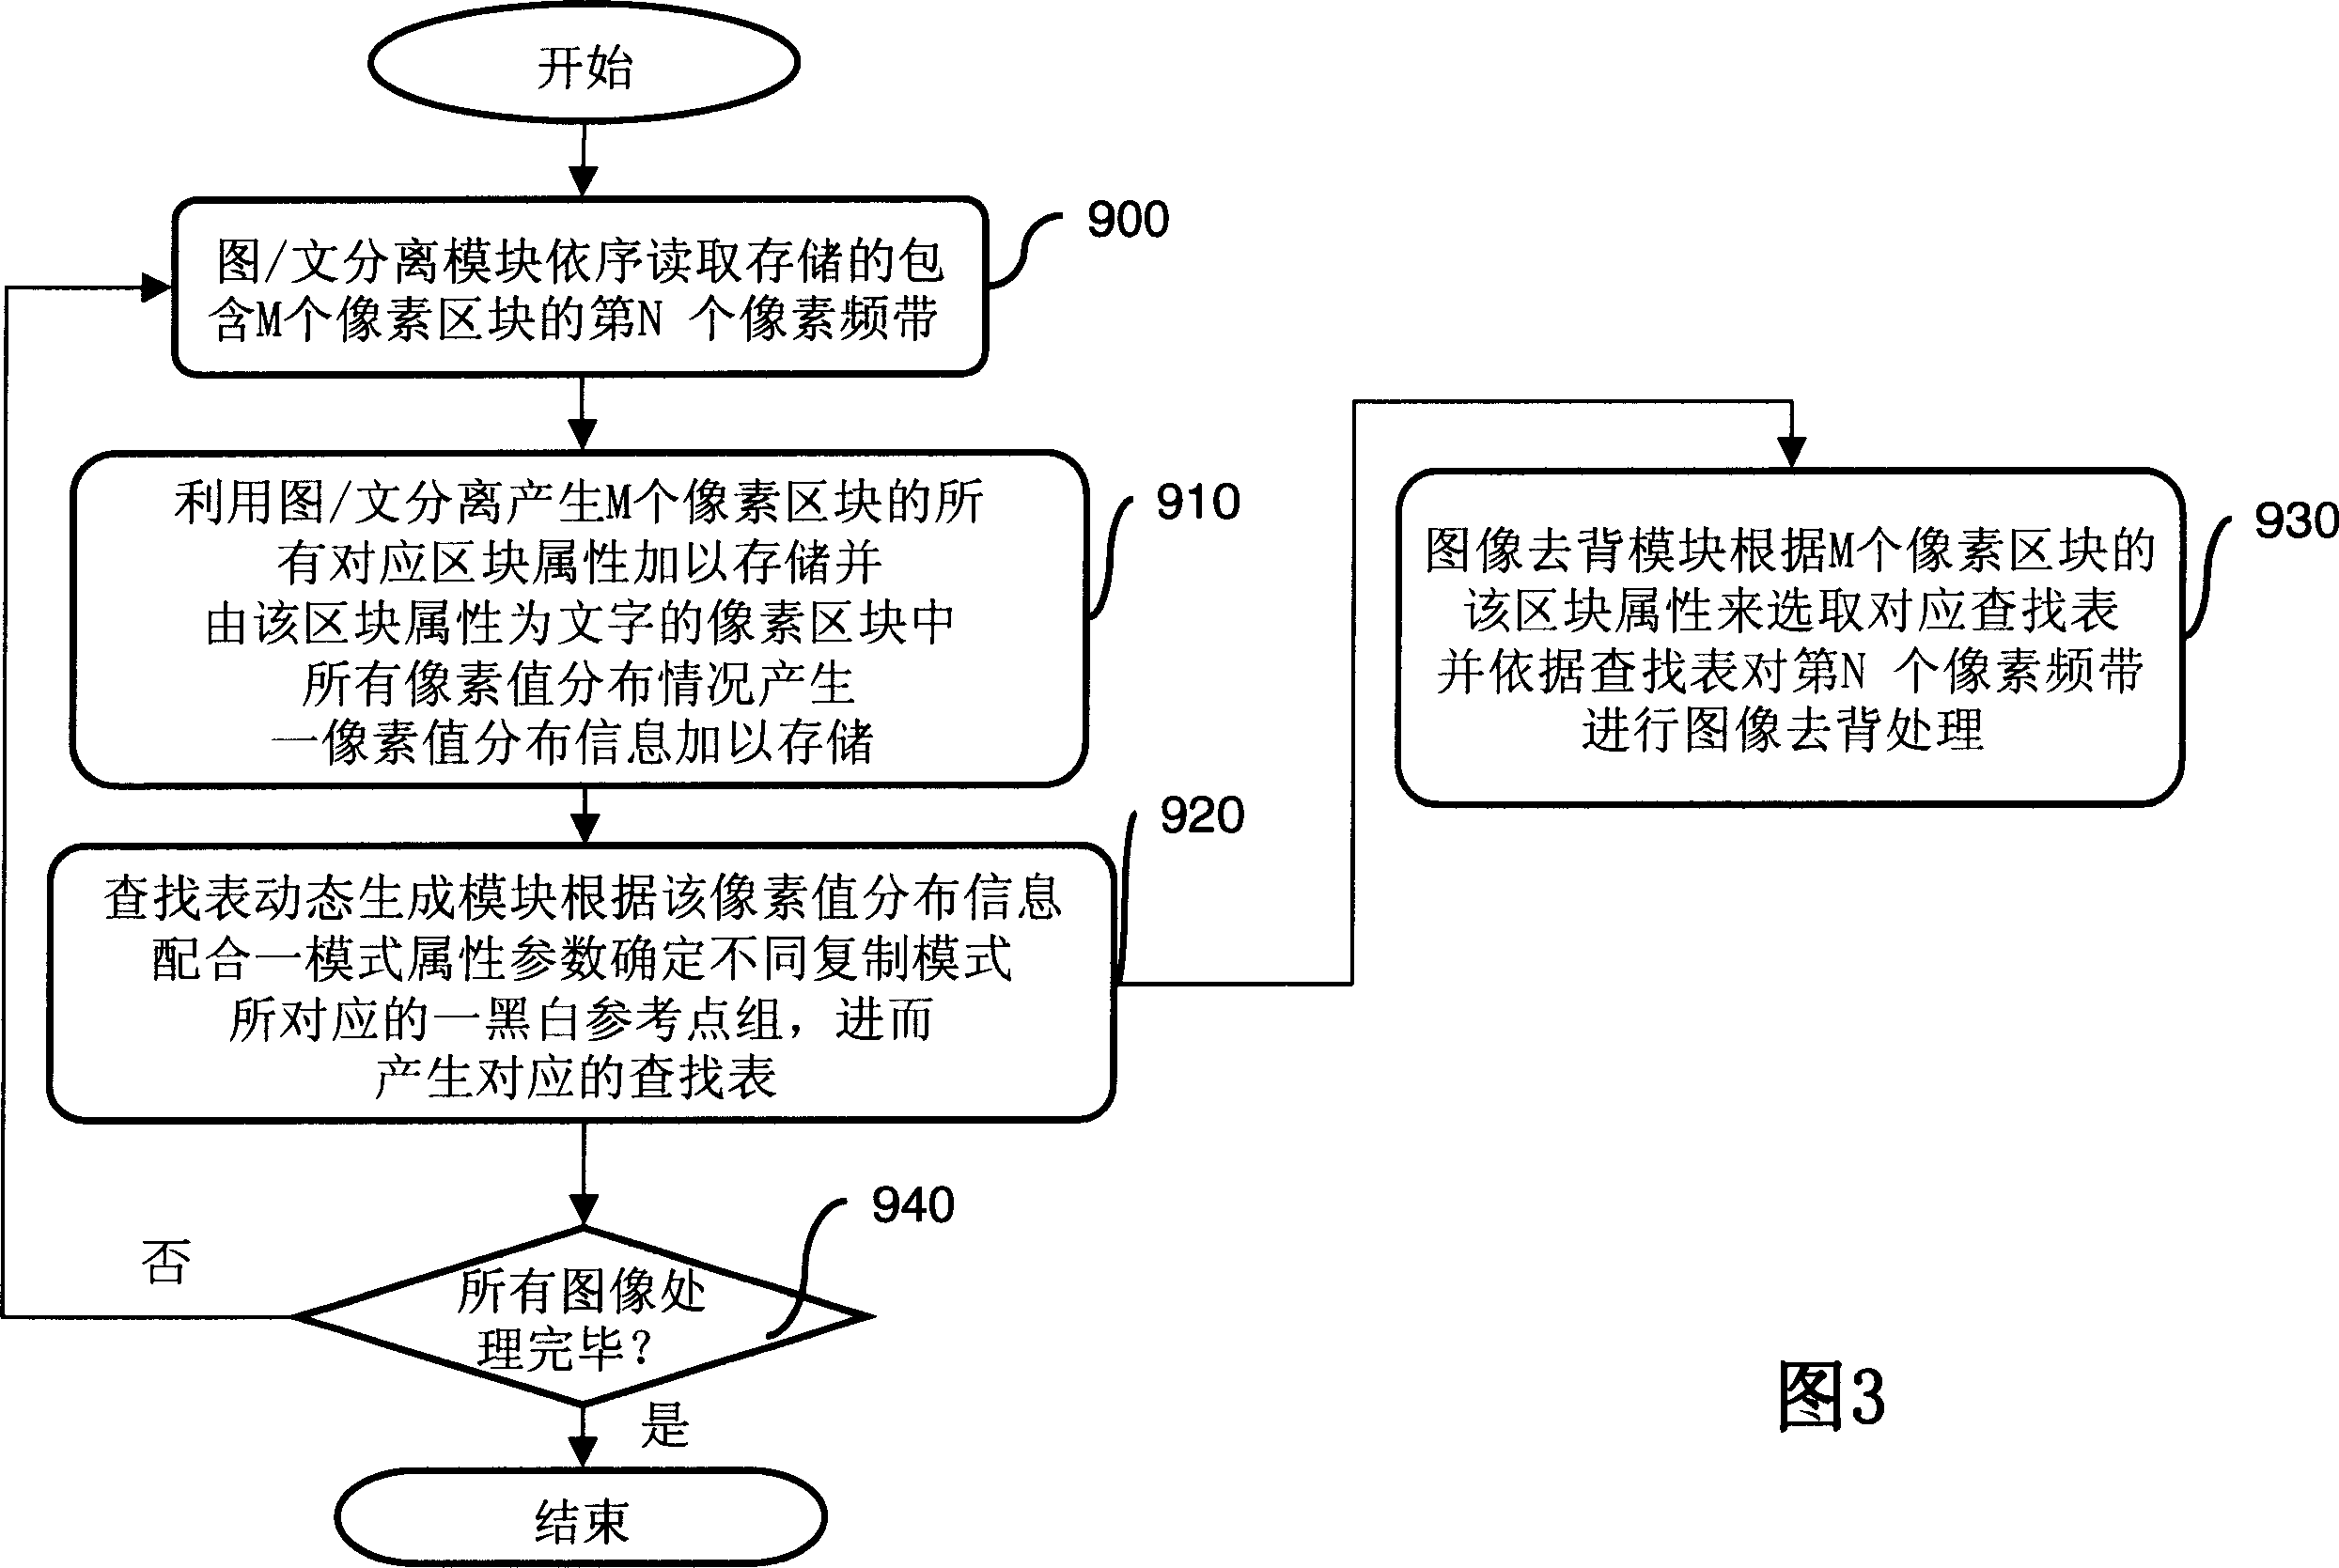 Monochrome image processing system and method for removing background of image based on dynamic data